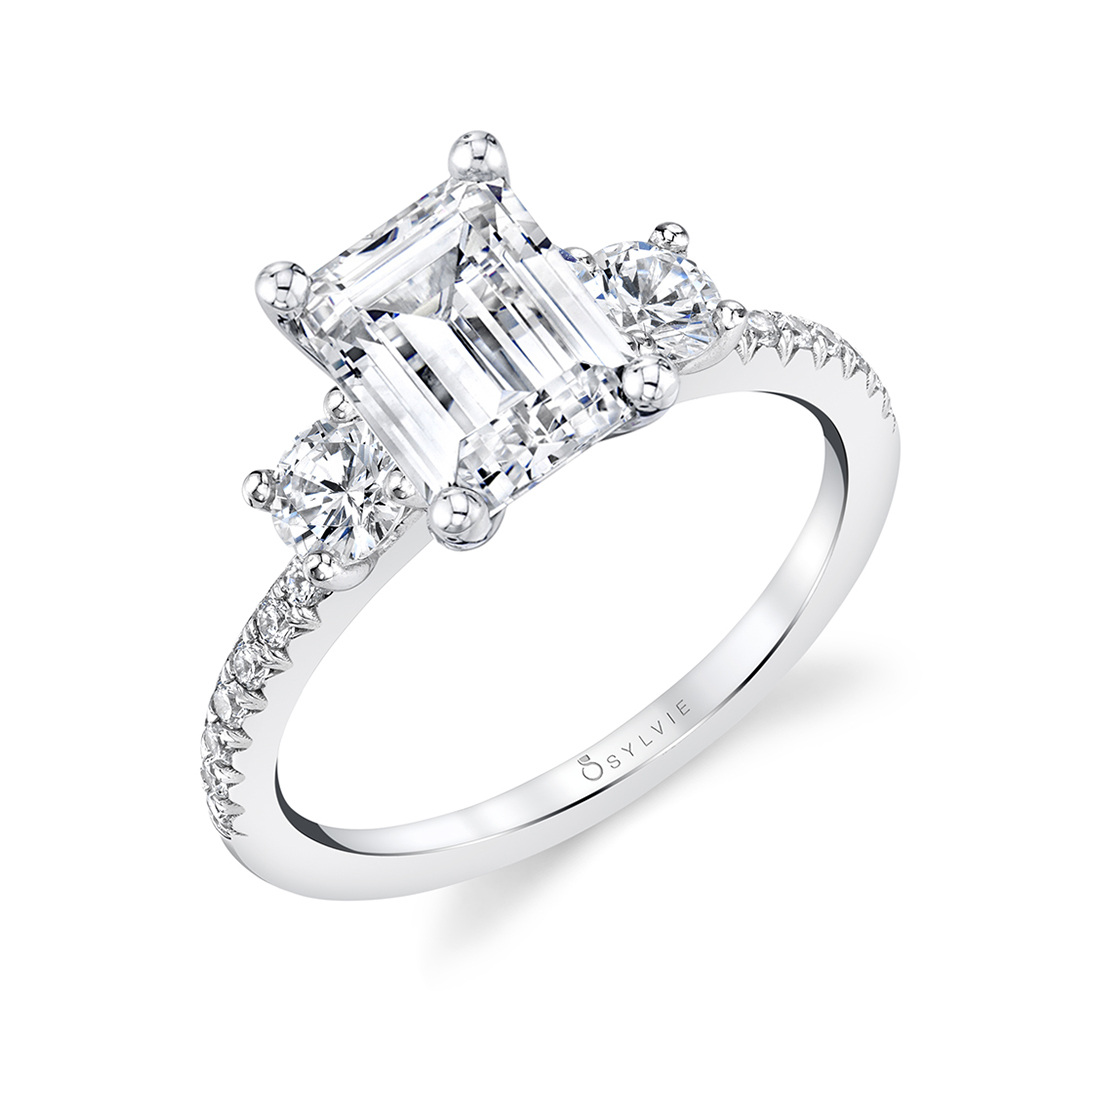 Emerald Cut Engagement Ring  by Sylvie